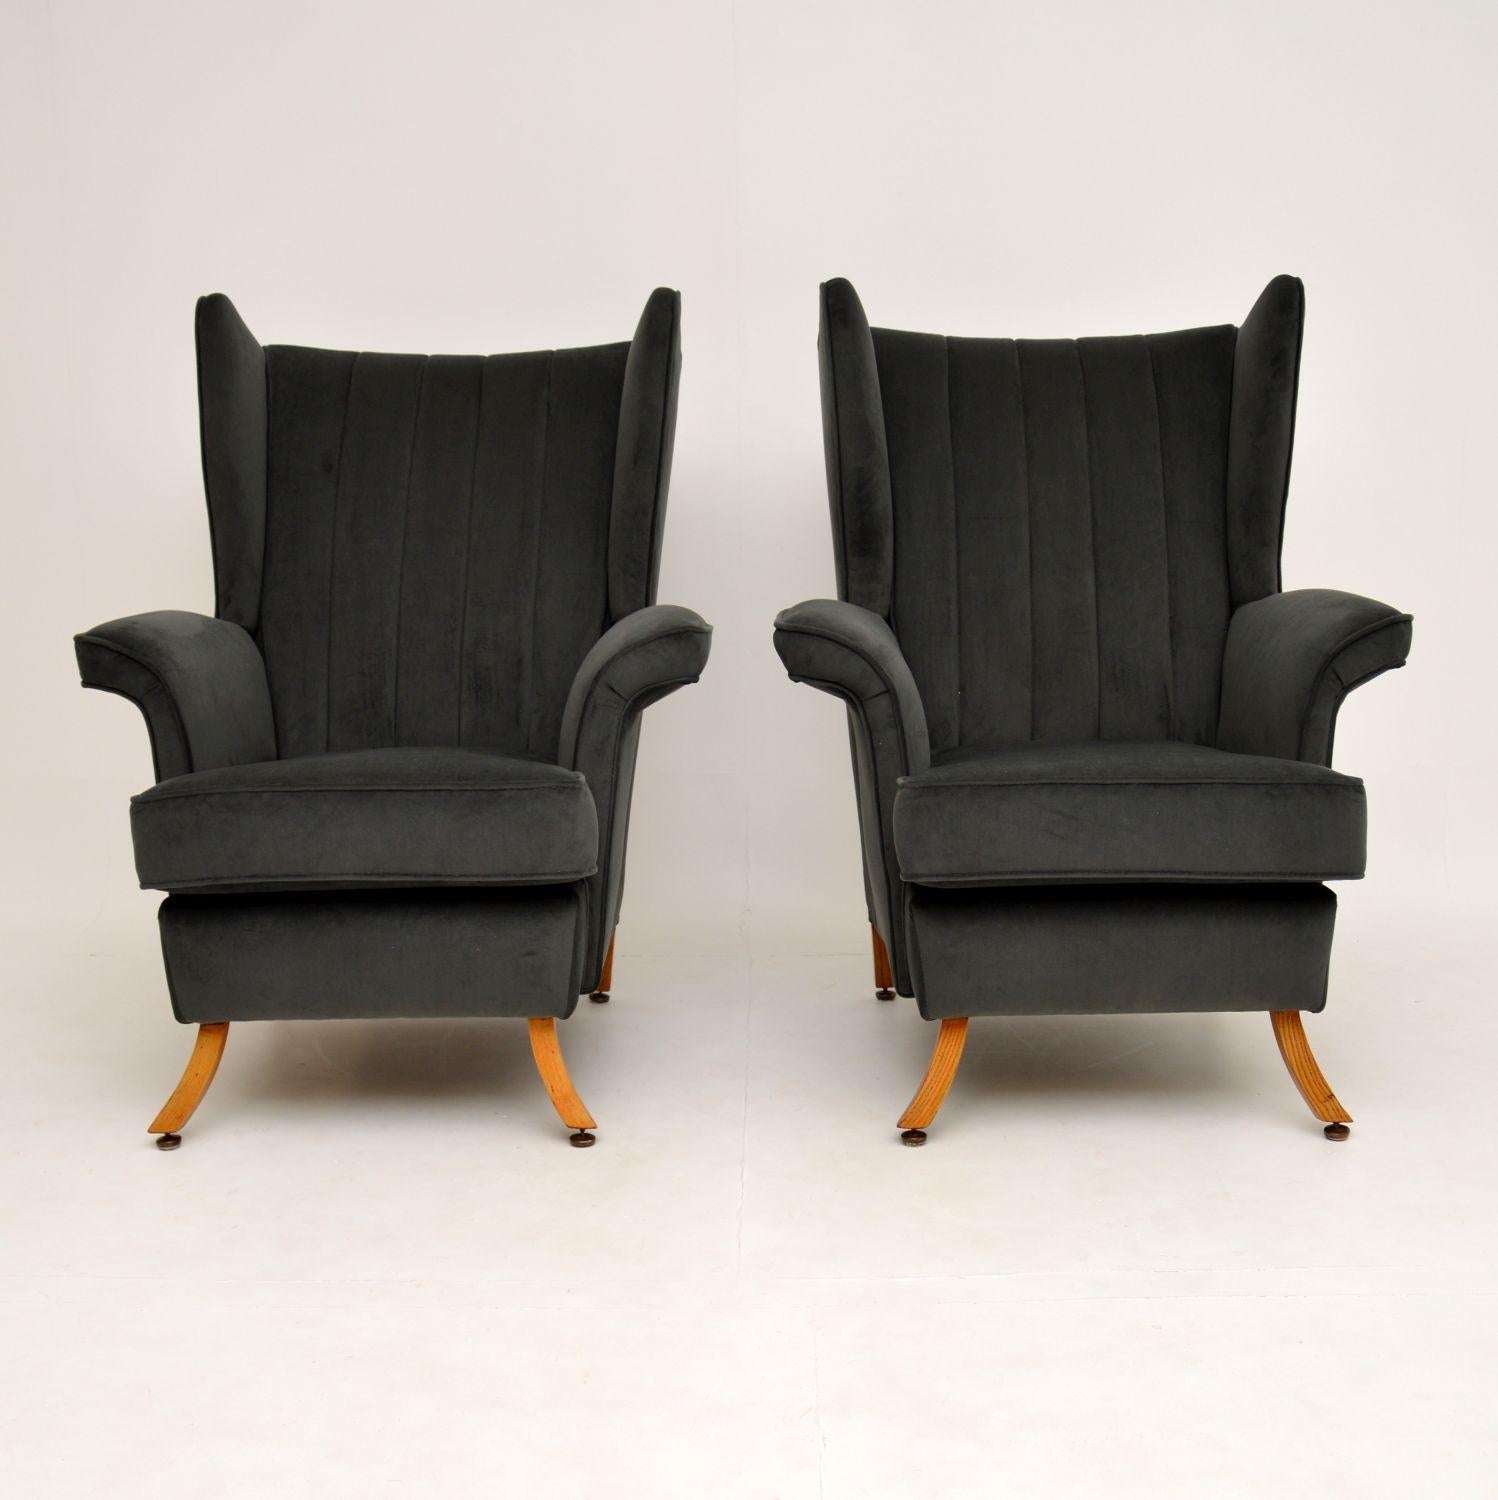 A stunning and very unusual pair of wing back armchairs, these date from the 1950-60’s. They are of generous proportions and are very comfortable.

They have a wonderful shape, with scalloped backs, curve over arms and beautiful splayed solid elm